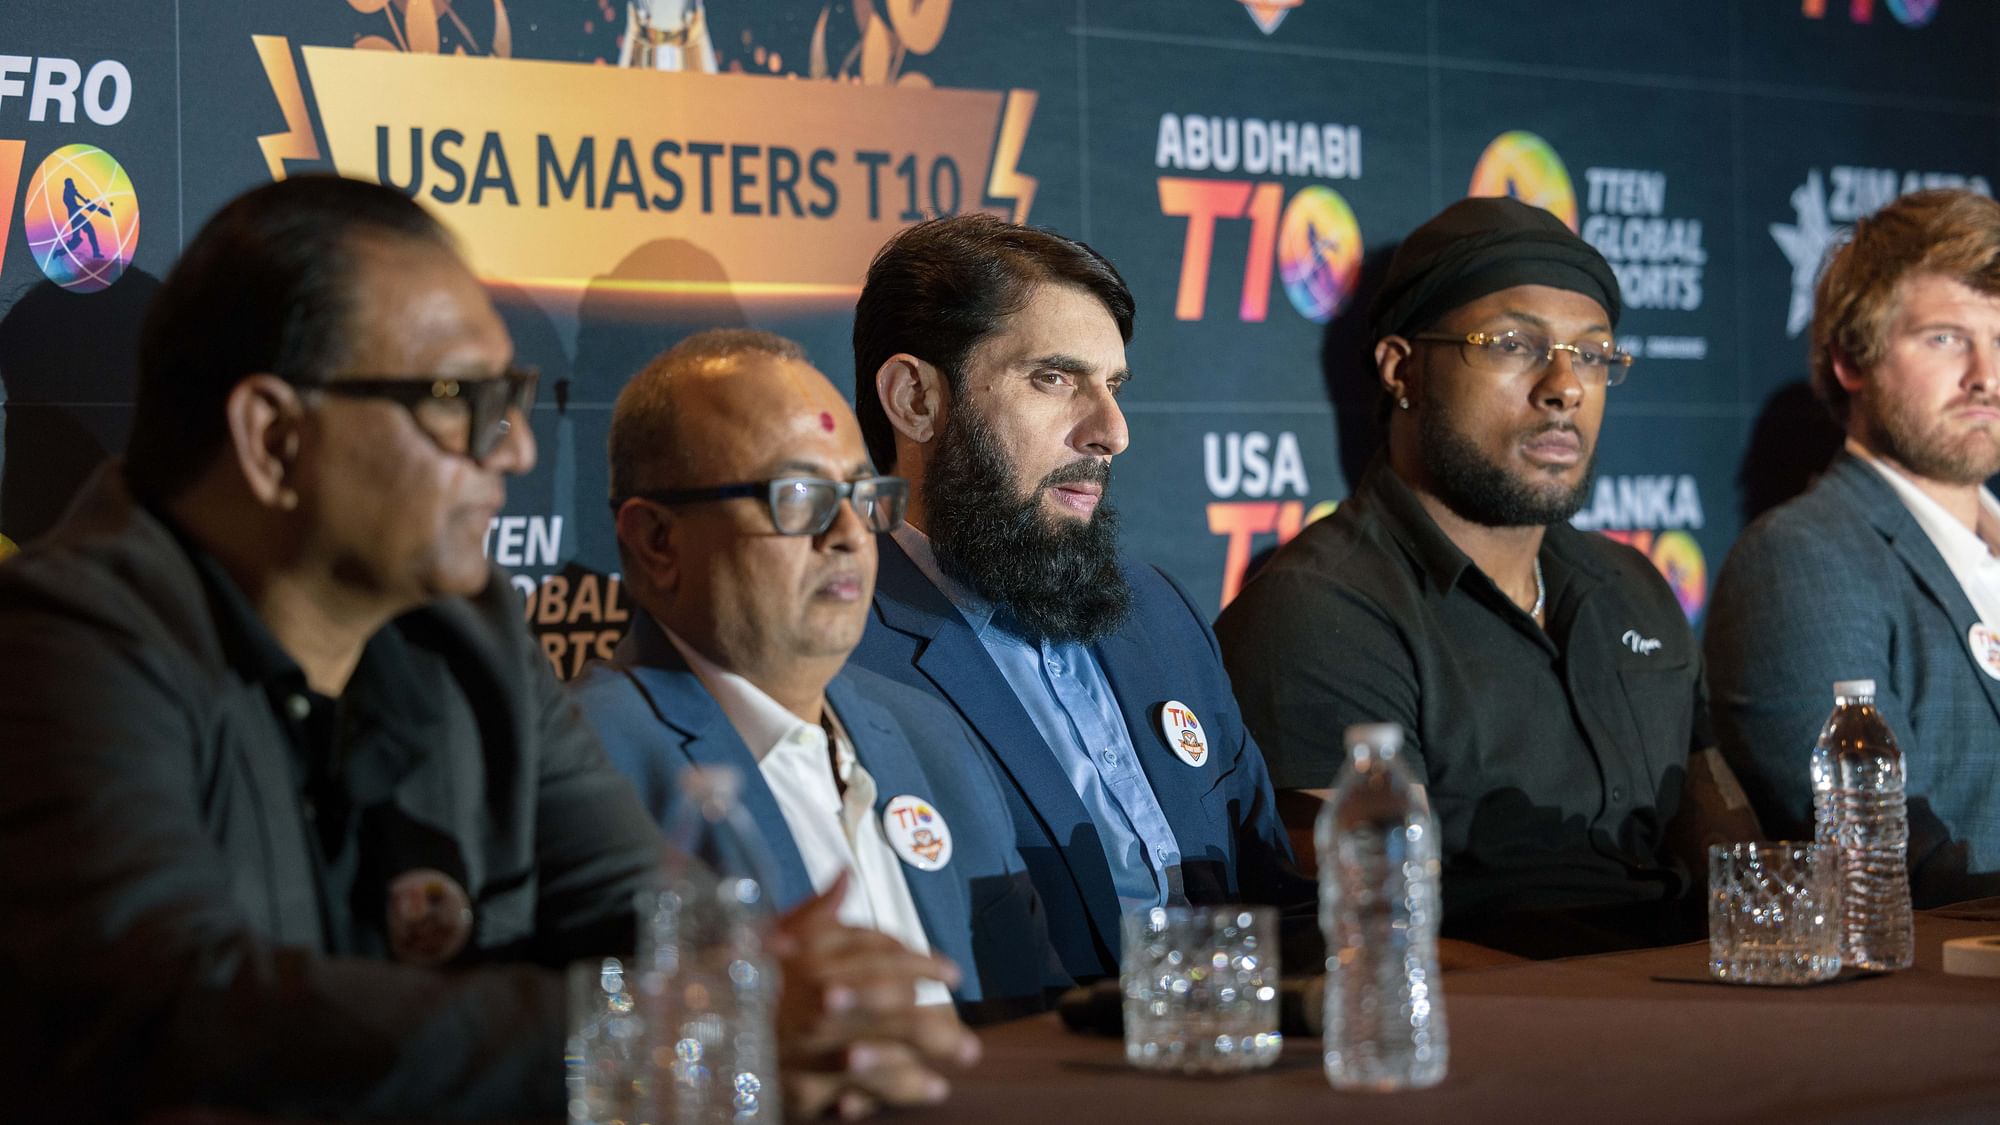 <div class="paragraphs"><p>Misbah Ul Haq and Corey Anderson at the press conference in Dallas.&nbsp;</p></div>